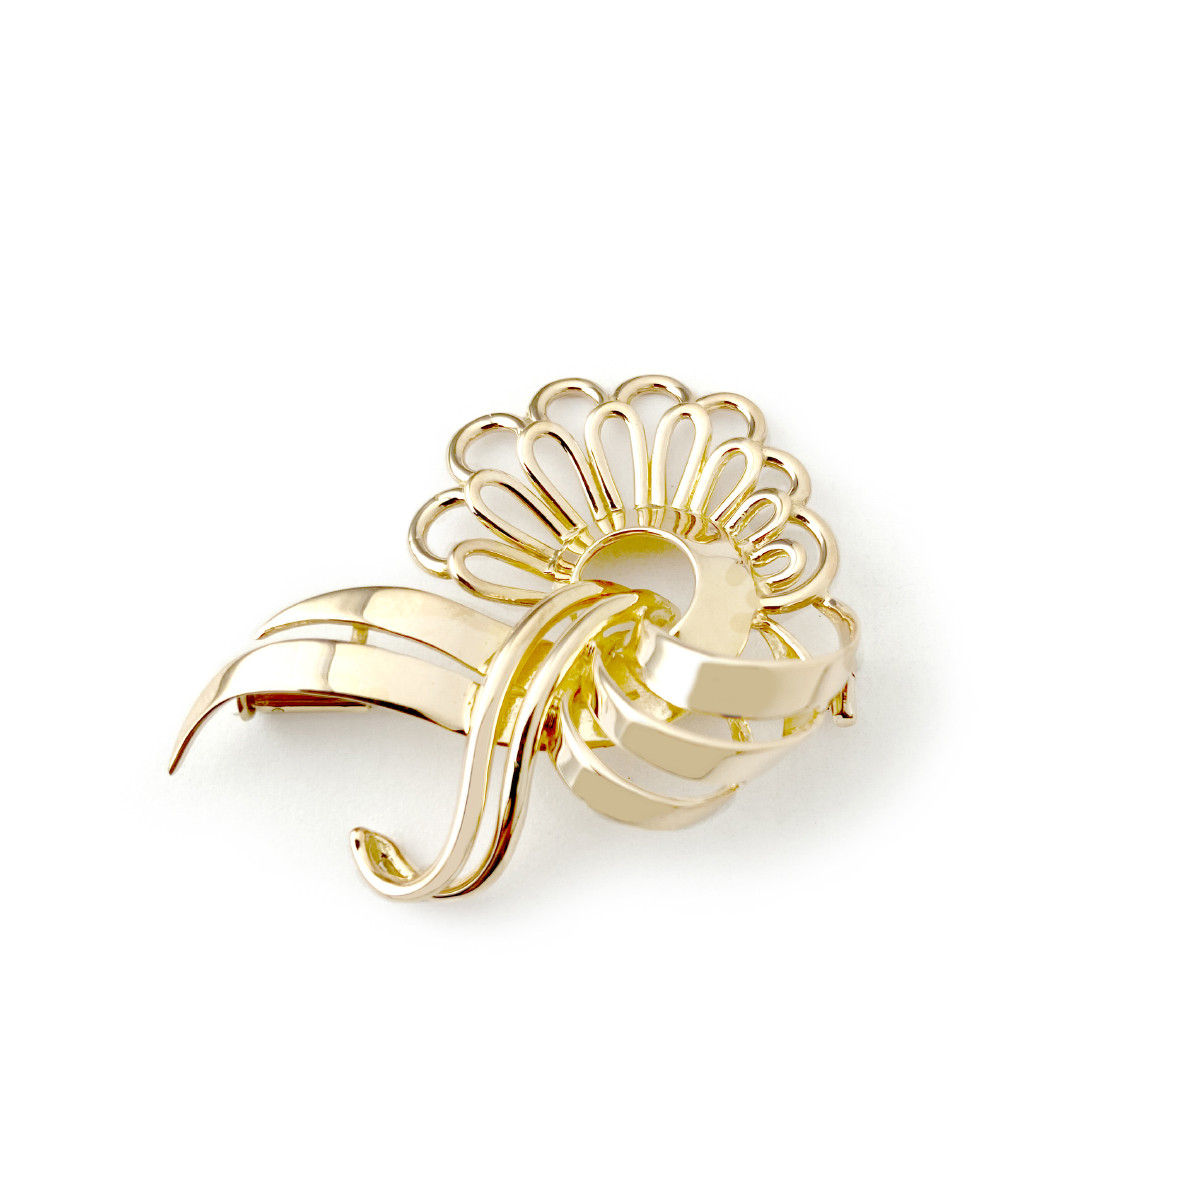 Broche d'occasion or 750 jaune